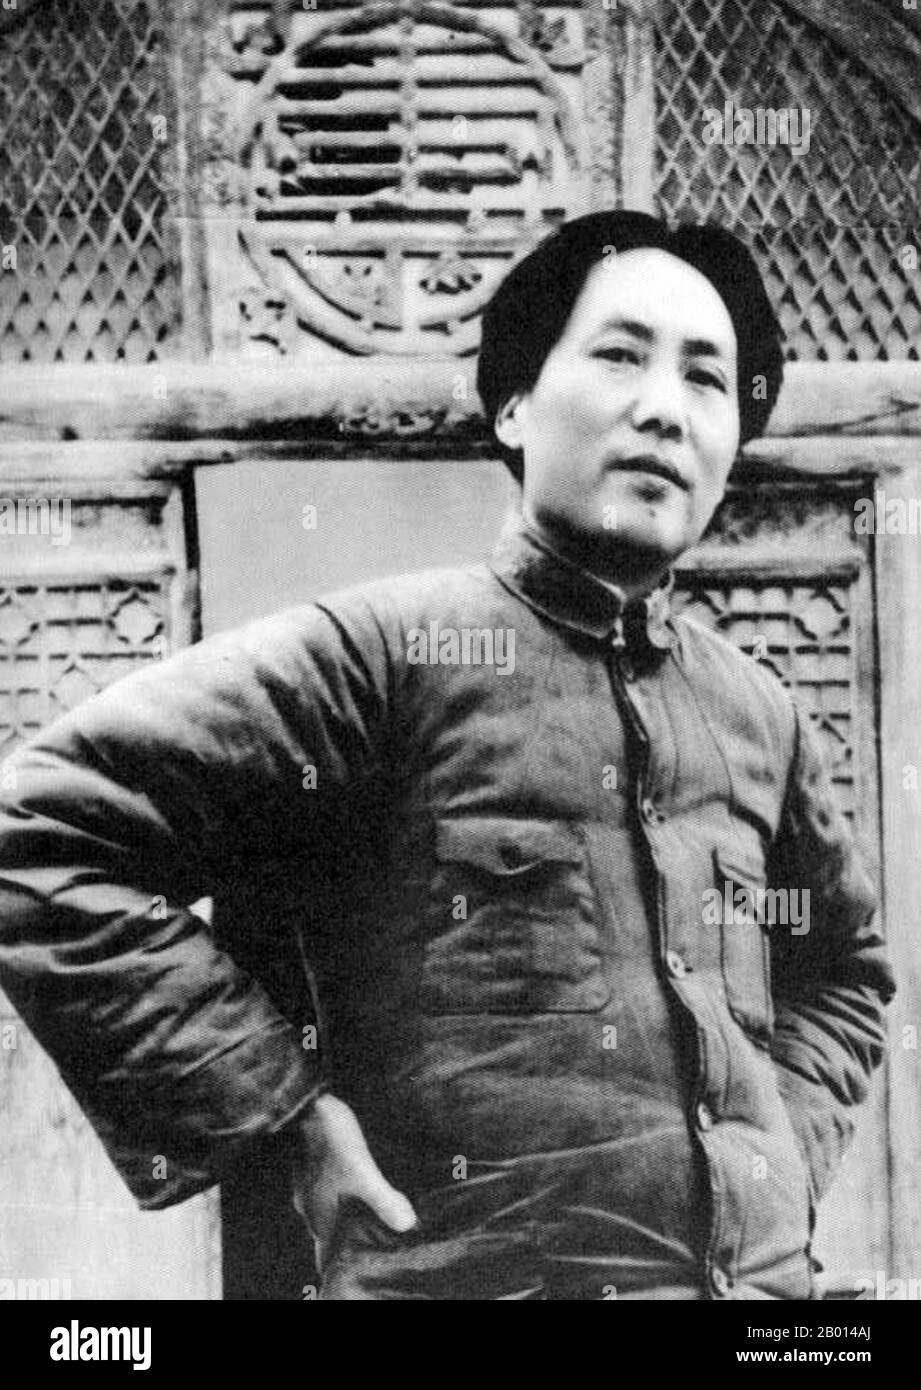 China: Mao Zedong (26 December 1893  – 9 September 1976), Chairman of the People's Republic of China, c. 1937.  Mao Zedong, also transliterated as Mao Tse-tung, was a Chinese communist revolutionary, guerrilla warfare strategist, author, political theorist, and leader of the Chinese Revolution. Commonly referred to as Chairman Mao, he was the architect of the People's Republic of China (PRC) from its establishment in 1949, and held authoritarian control over the nation until his death in 1976. His theoretical contribution to Marxism-Leninism was collectively known as Maoism. Stock Photo